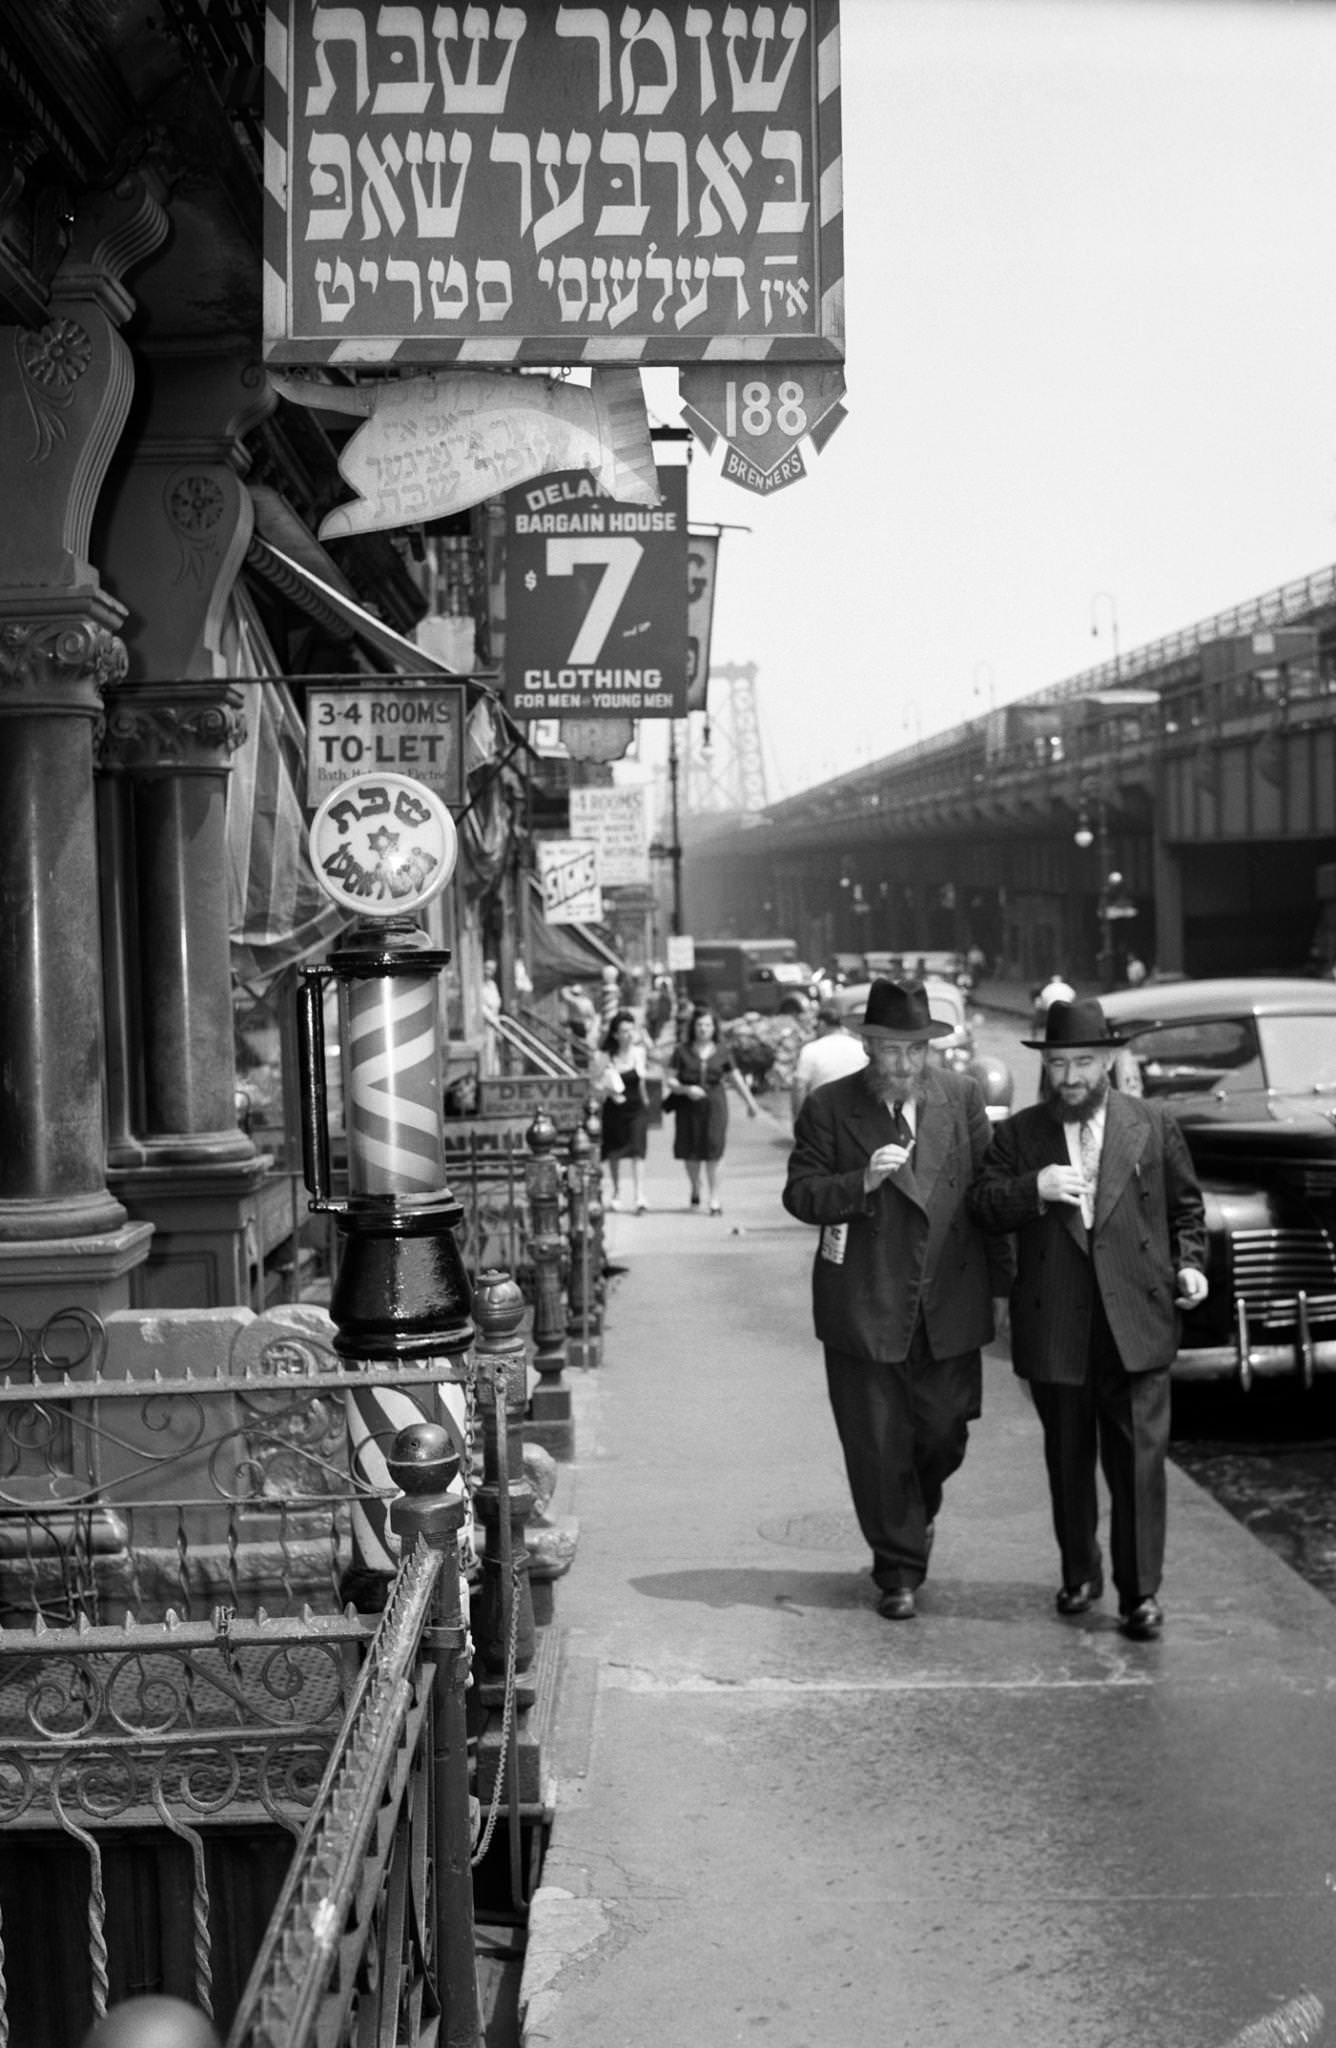 Lower East Side With Signs In Yiddish On Delancy Street, Barber Shop With Williamsburg Bridge In Background, Manhattan, 1940S